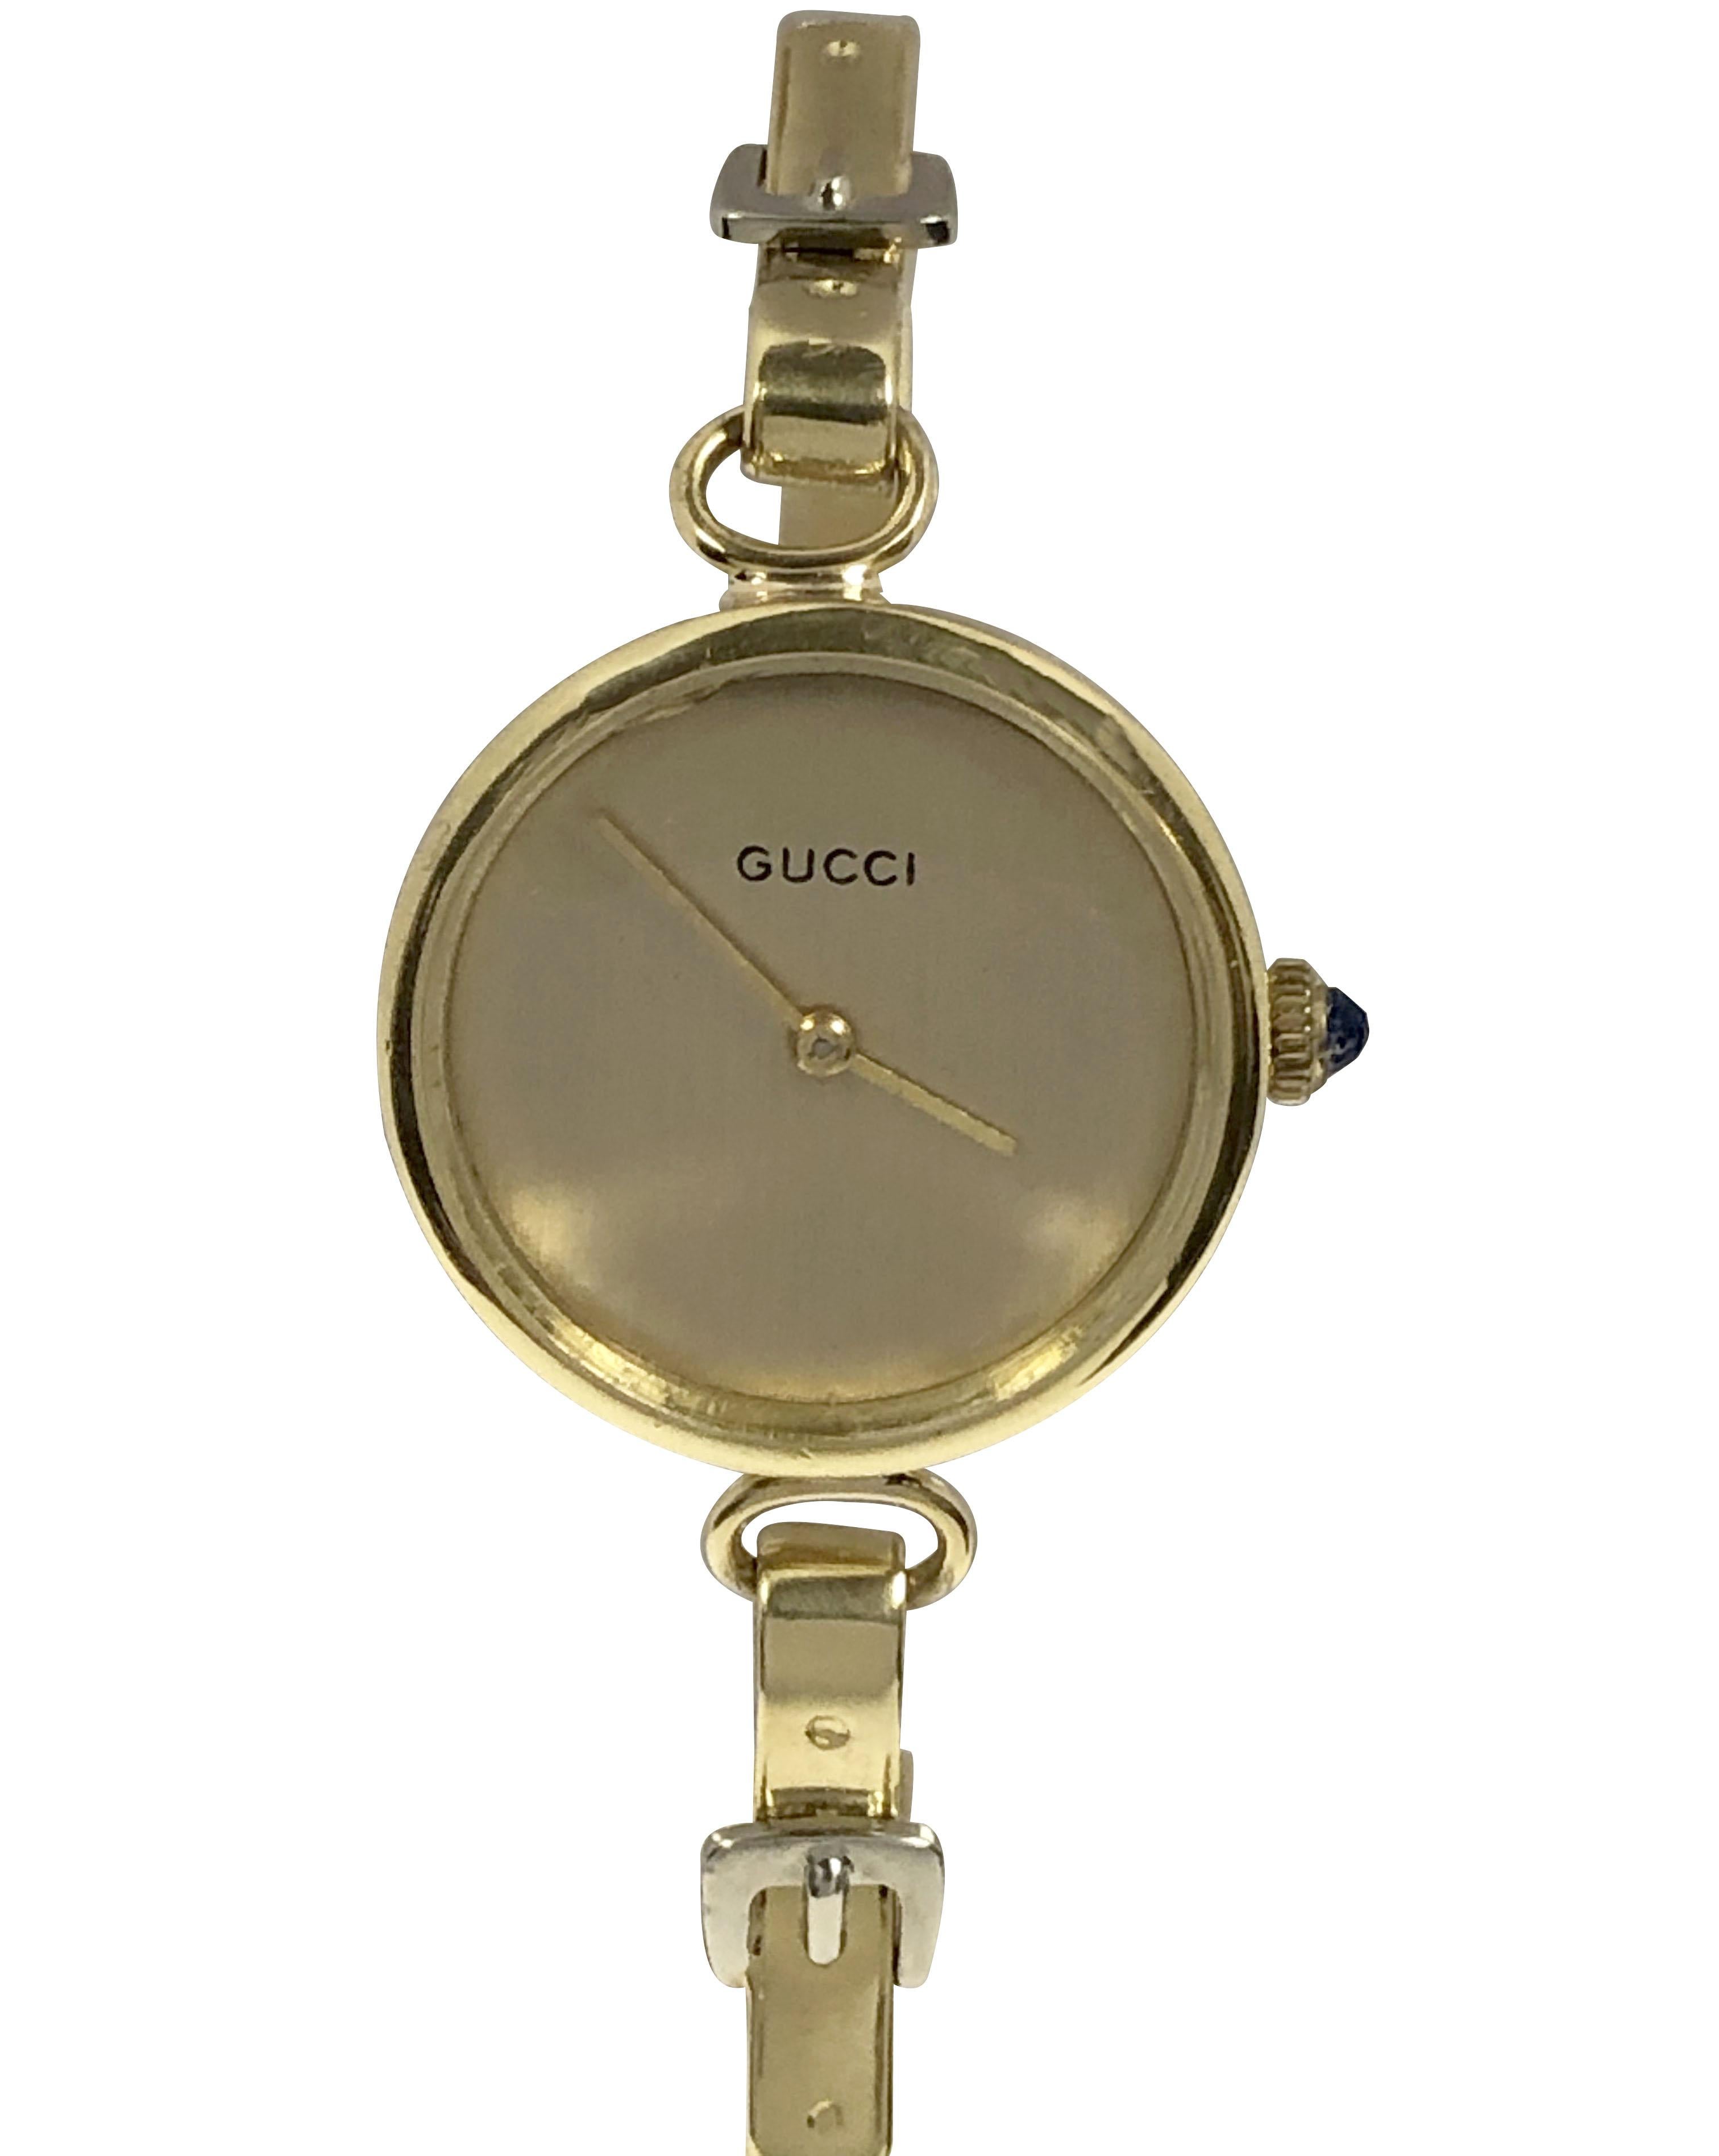 Circa 1970s Gucci for the French Market ladies wristrist bracelet en or jaune 18k, 24 M-One 2 Piece case, 17 Jewel mechanical, manual wind movement, Gold Satin Dial with a Glass Crystal and a Sapphire Crown. Bracelet de style Bangle avec motif